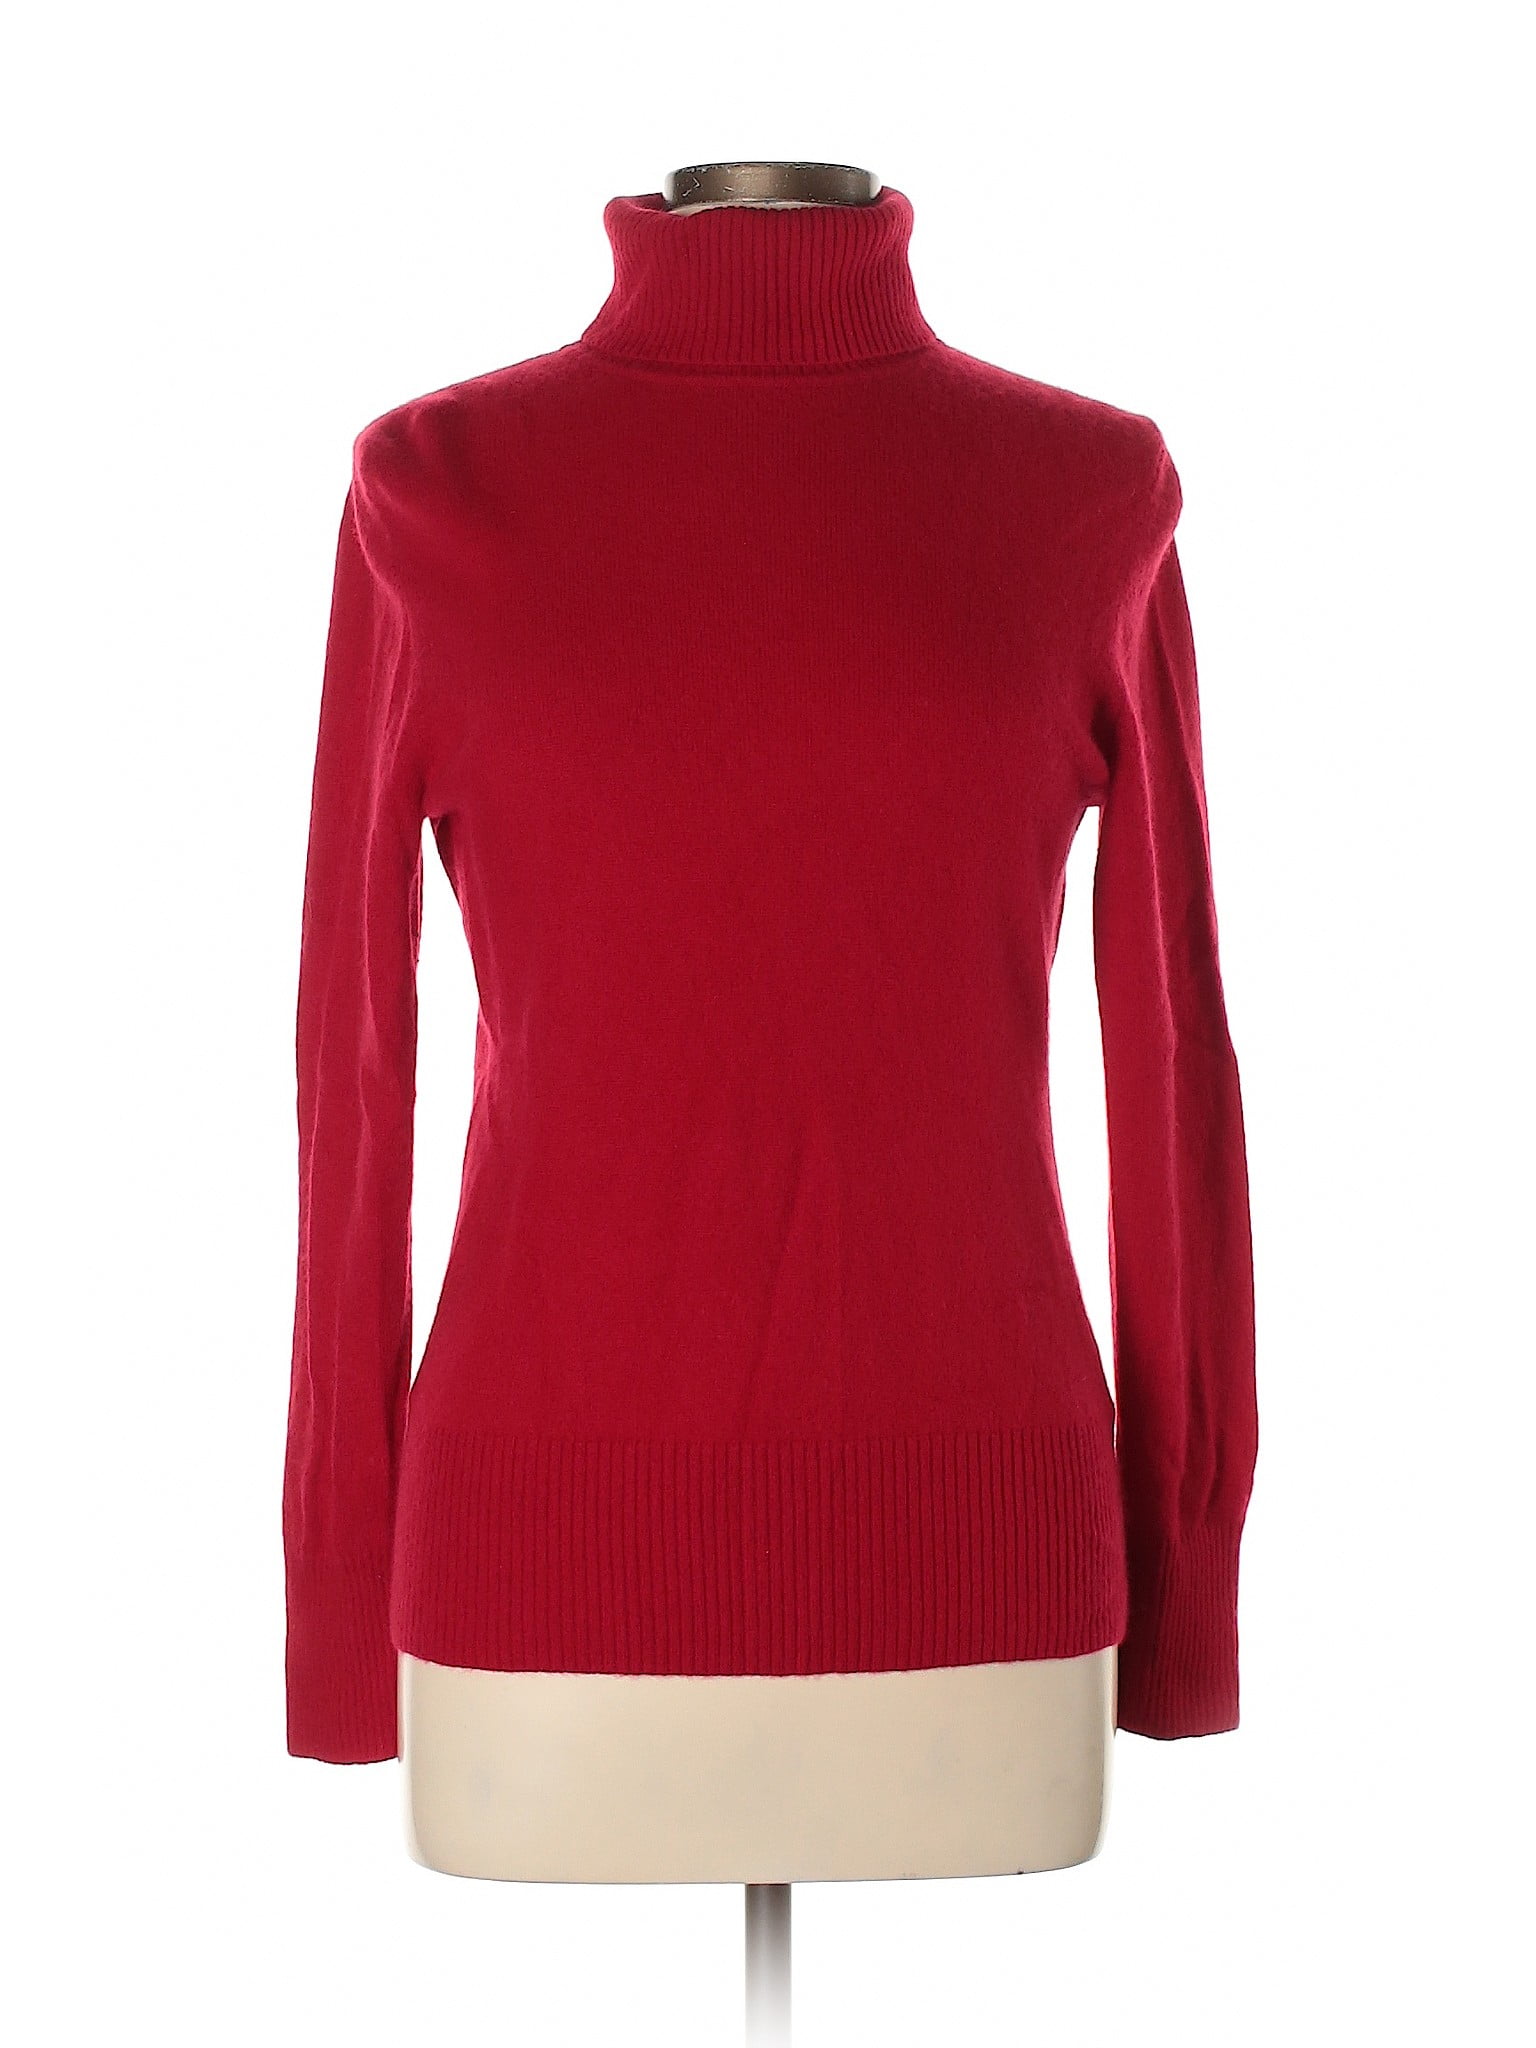 Apt. 9 - Pre-Owned Apt. 9 Women's Size L Cashmere Pullover Sweater ...